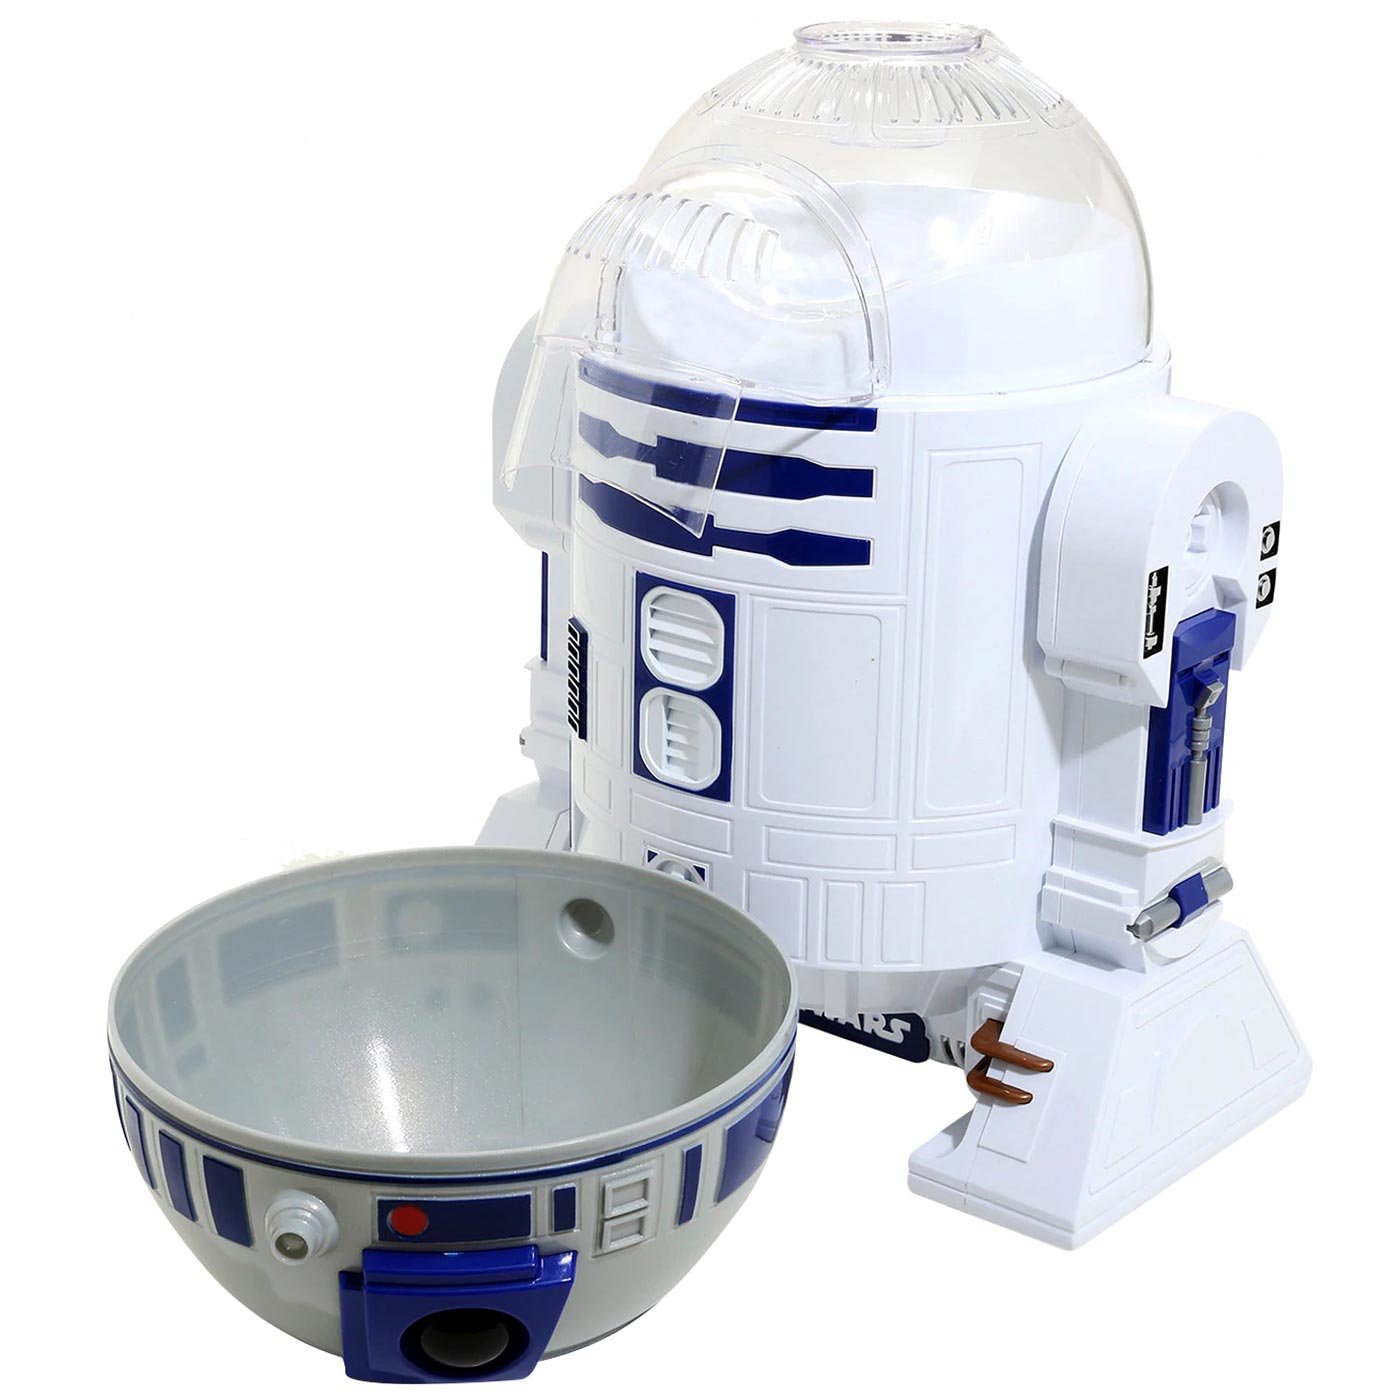 R2-D2 popcorn maker in action. It was messy. Hoping the next time